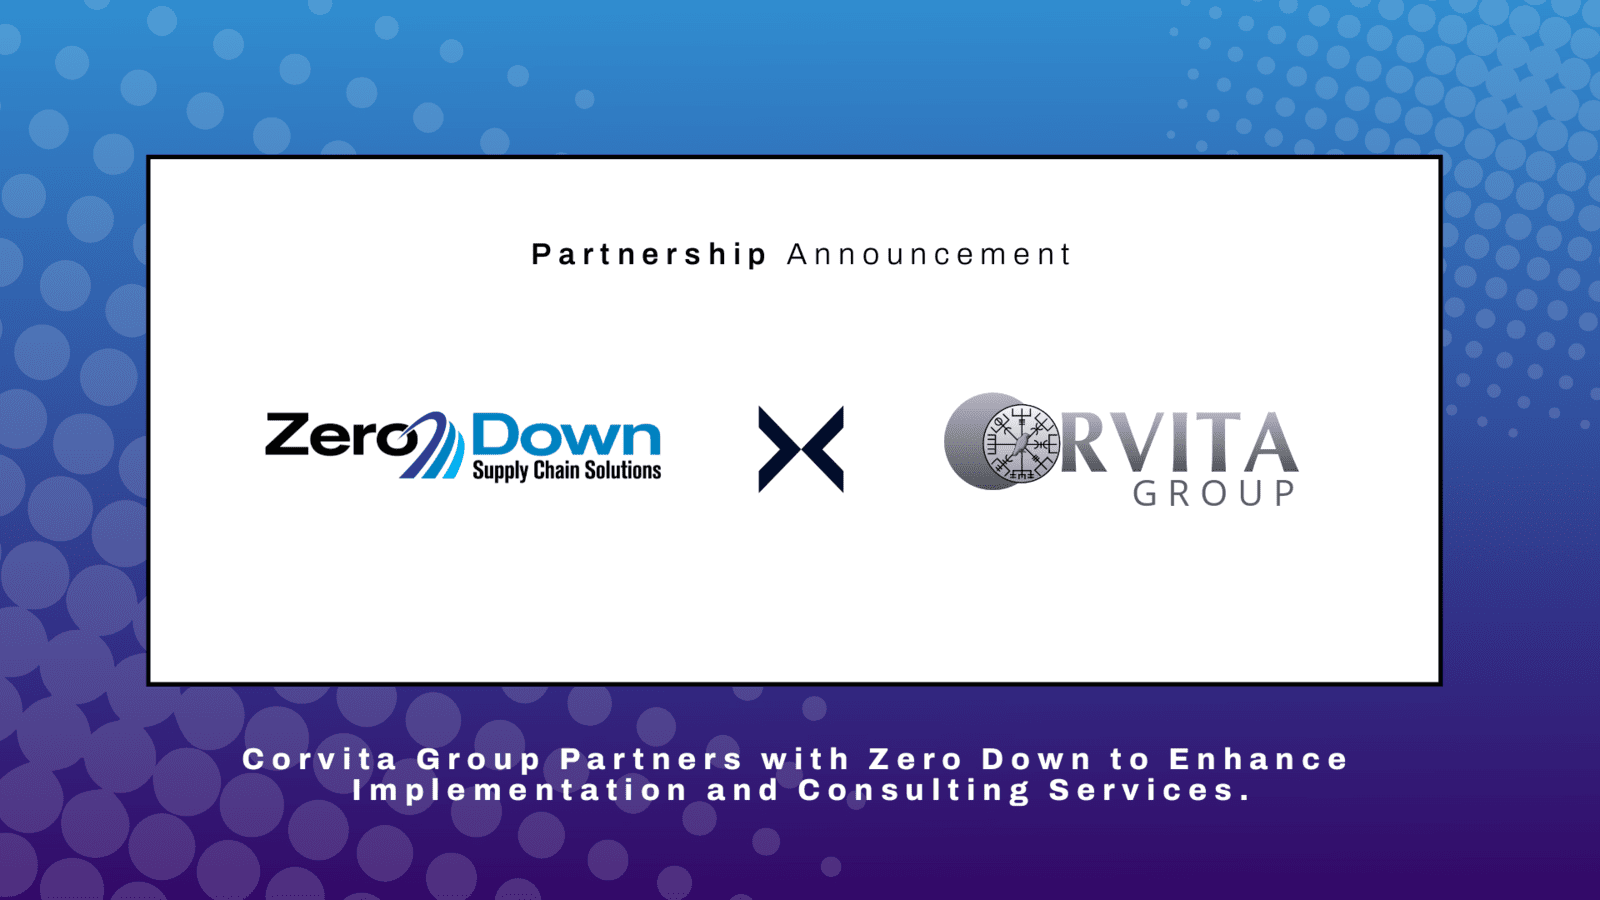 Corvita Group Announces Strategic Partnership with Zero Down to Enhance Implementation and Consulting Services